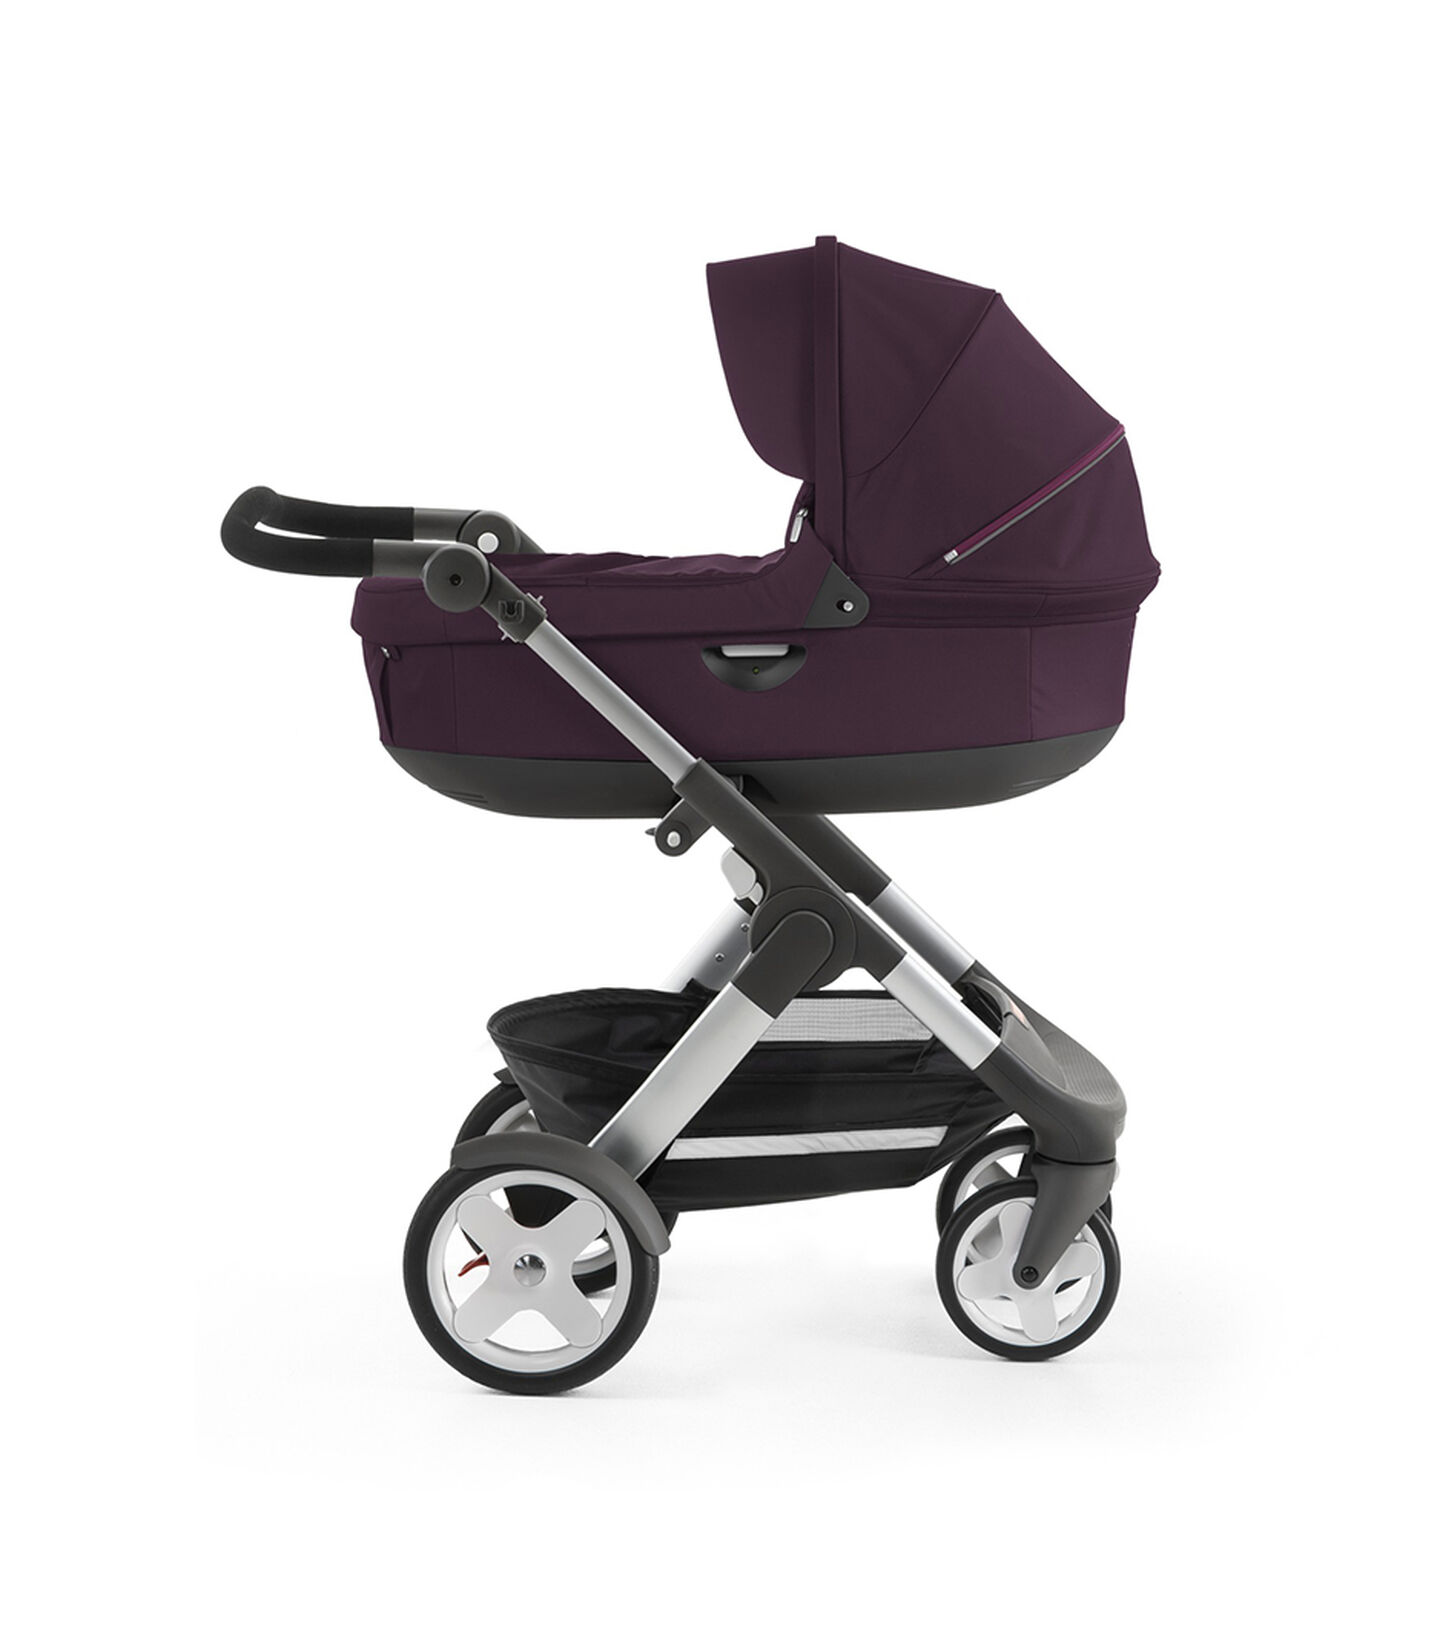 Stokke® Trailz™ with Stokke® Stroller Carry Cot, Purple. Classic Wheels. view 2